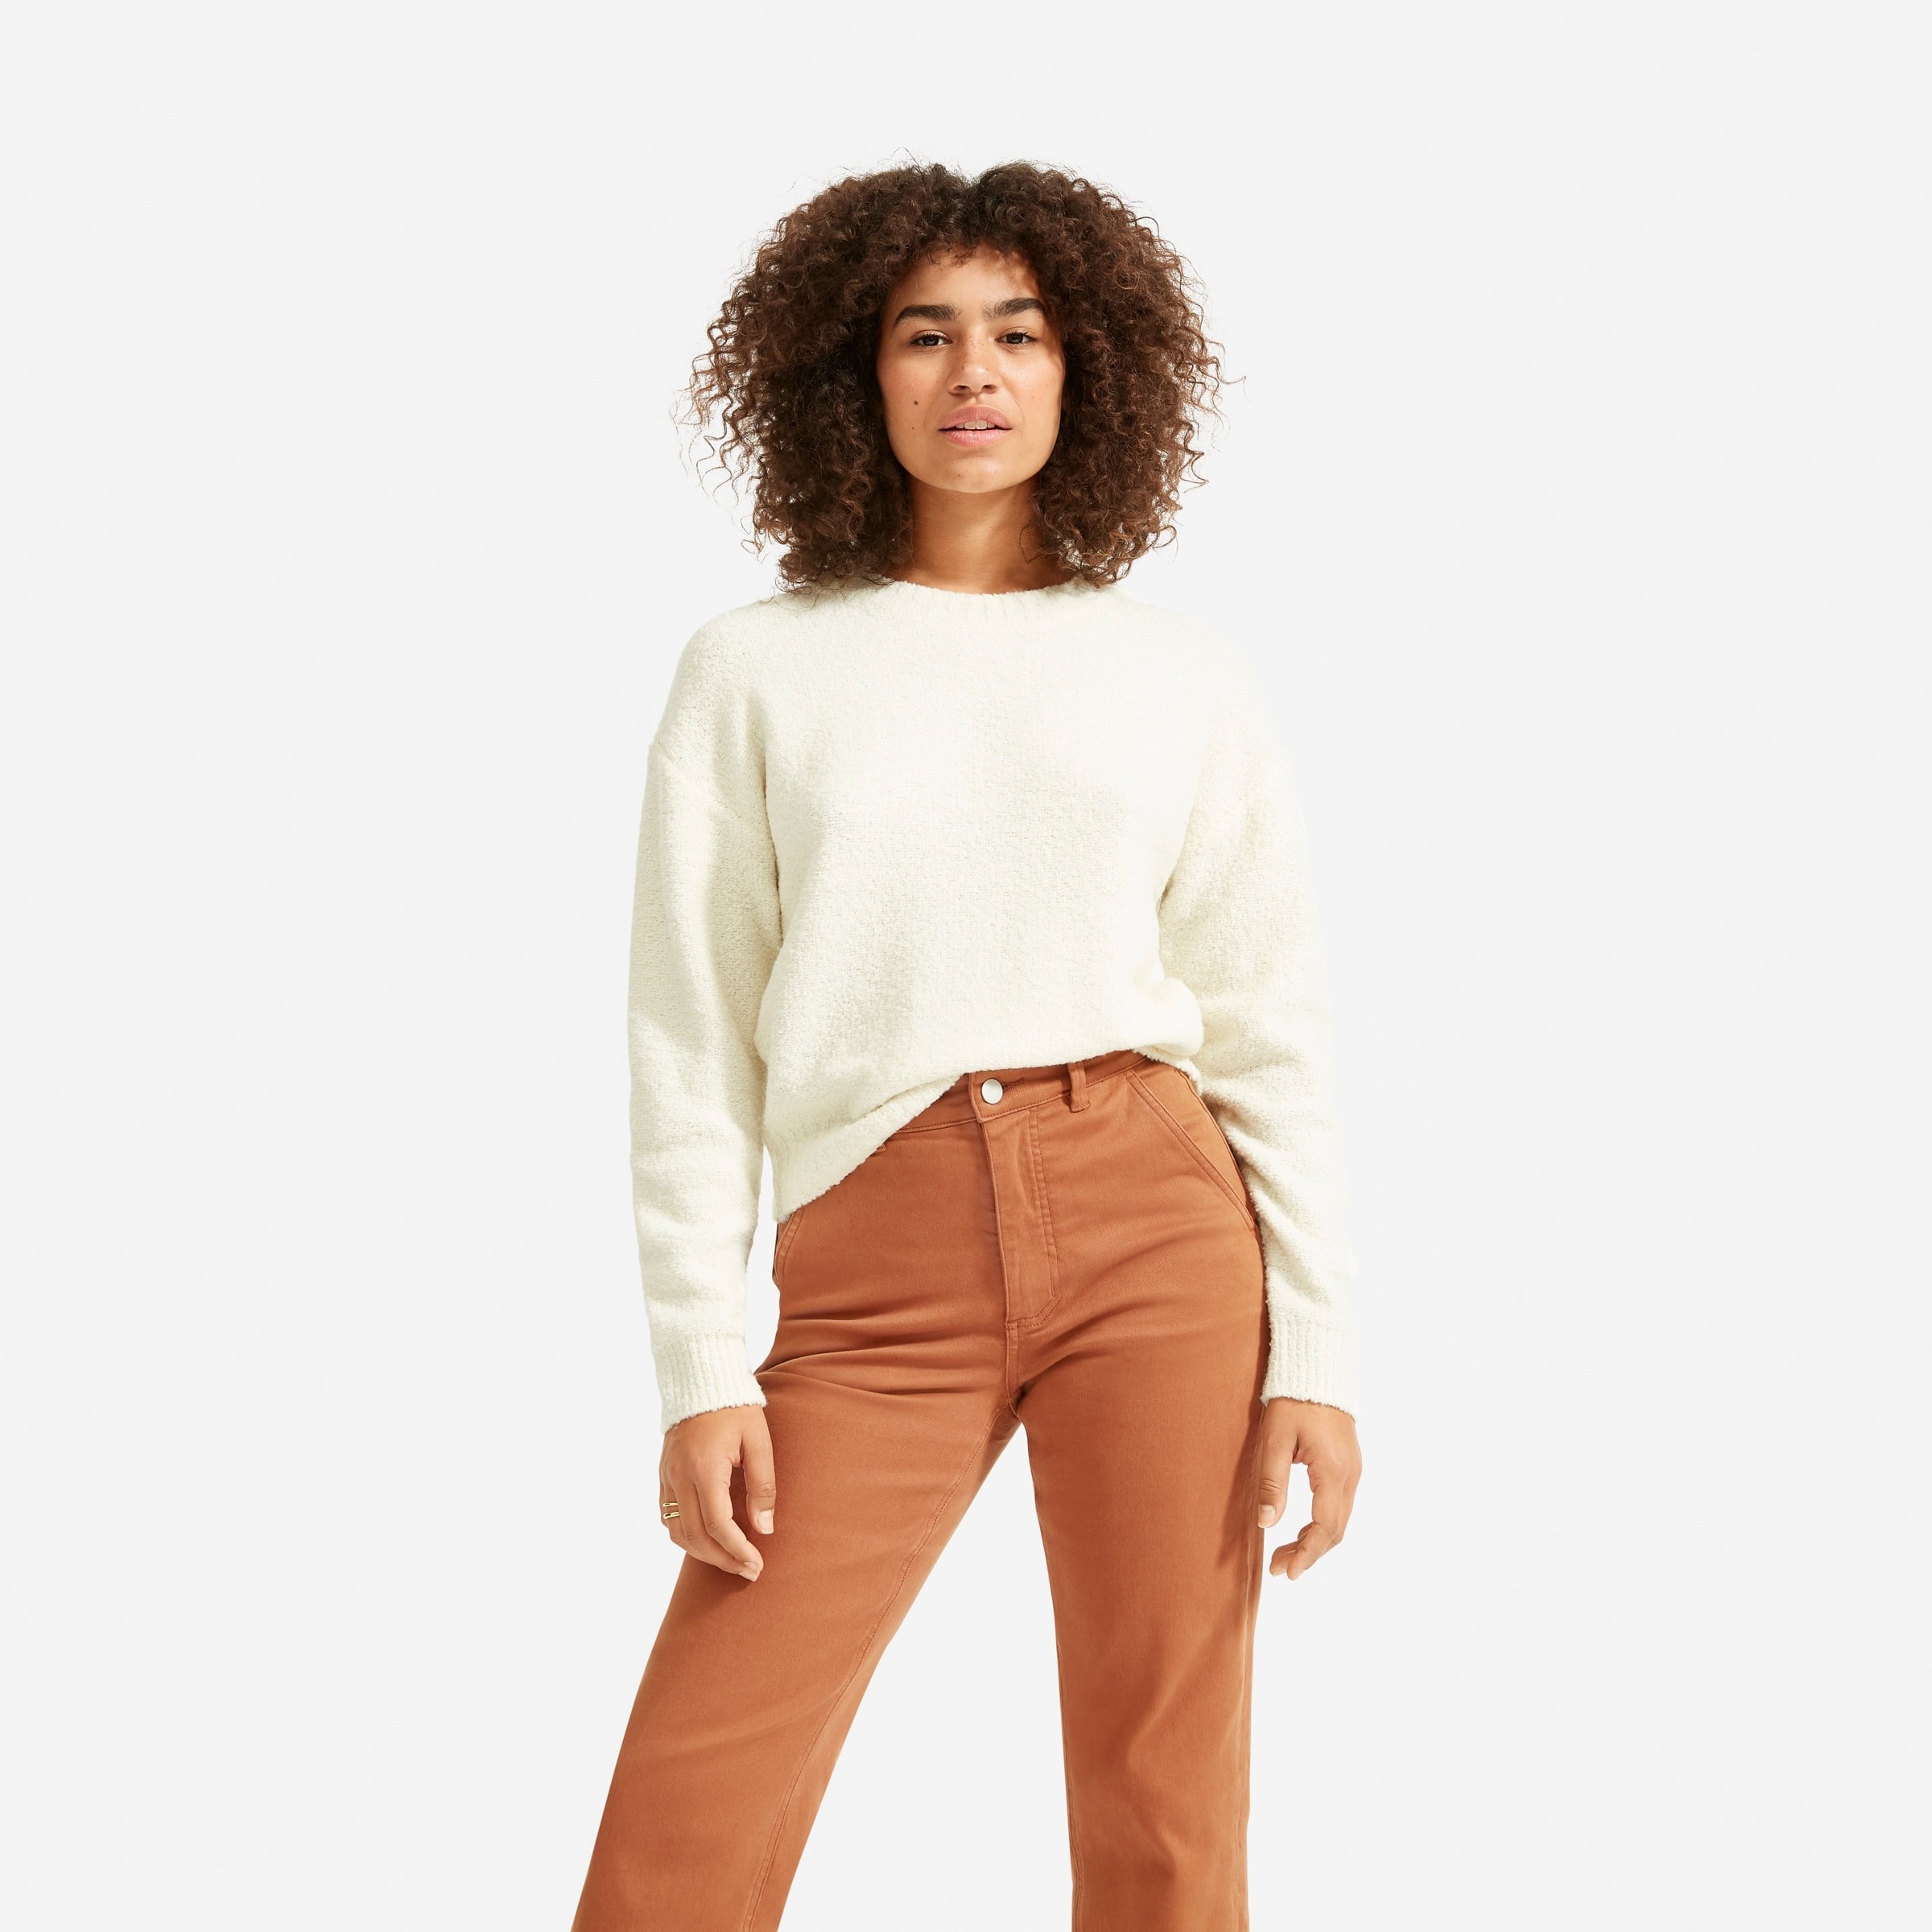 Everlane Has Wardrobe Essentials For Up To 50% Off Right Now